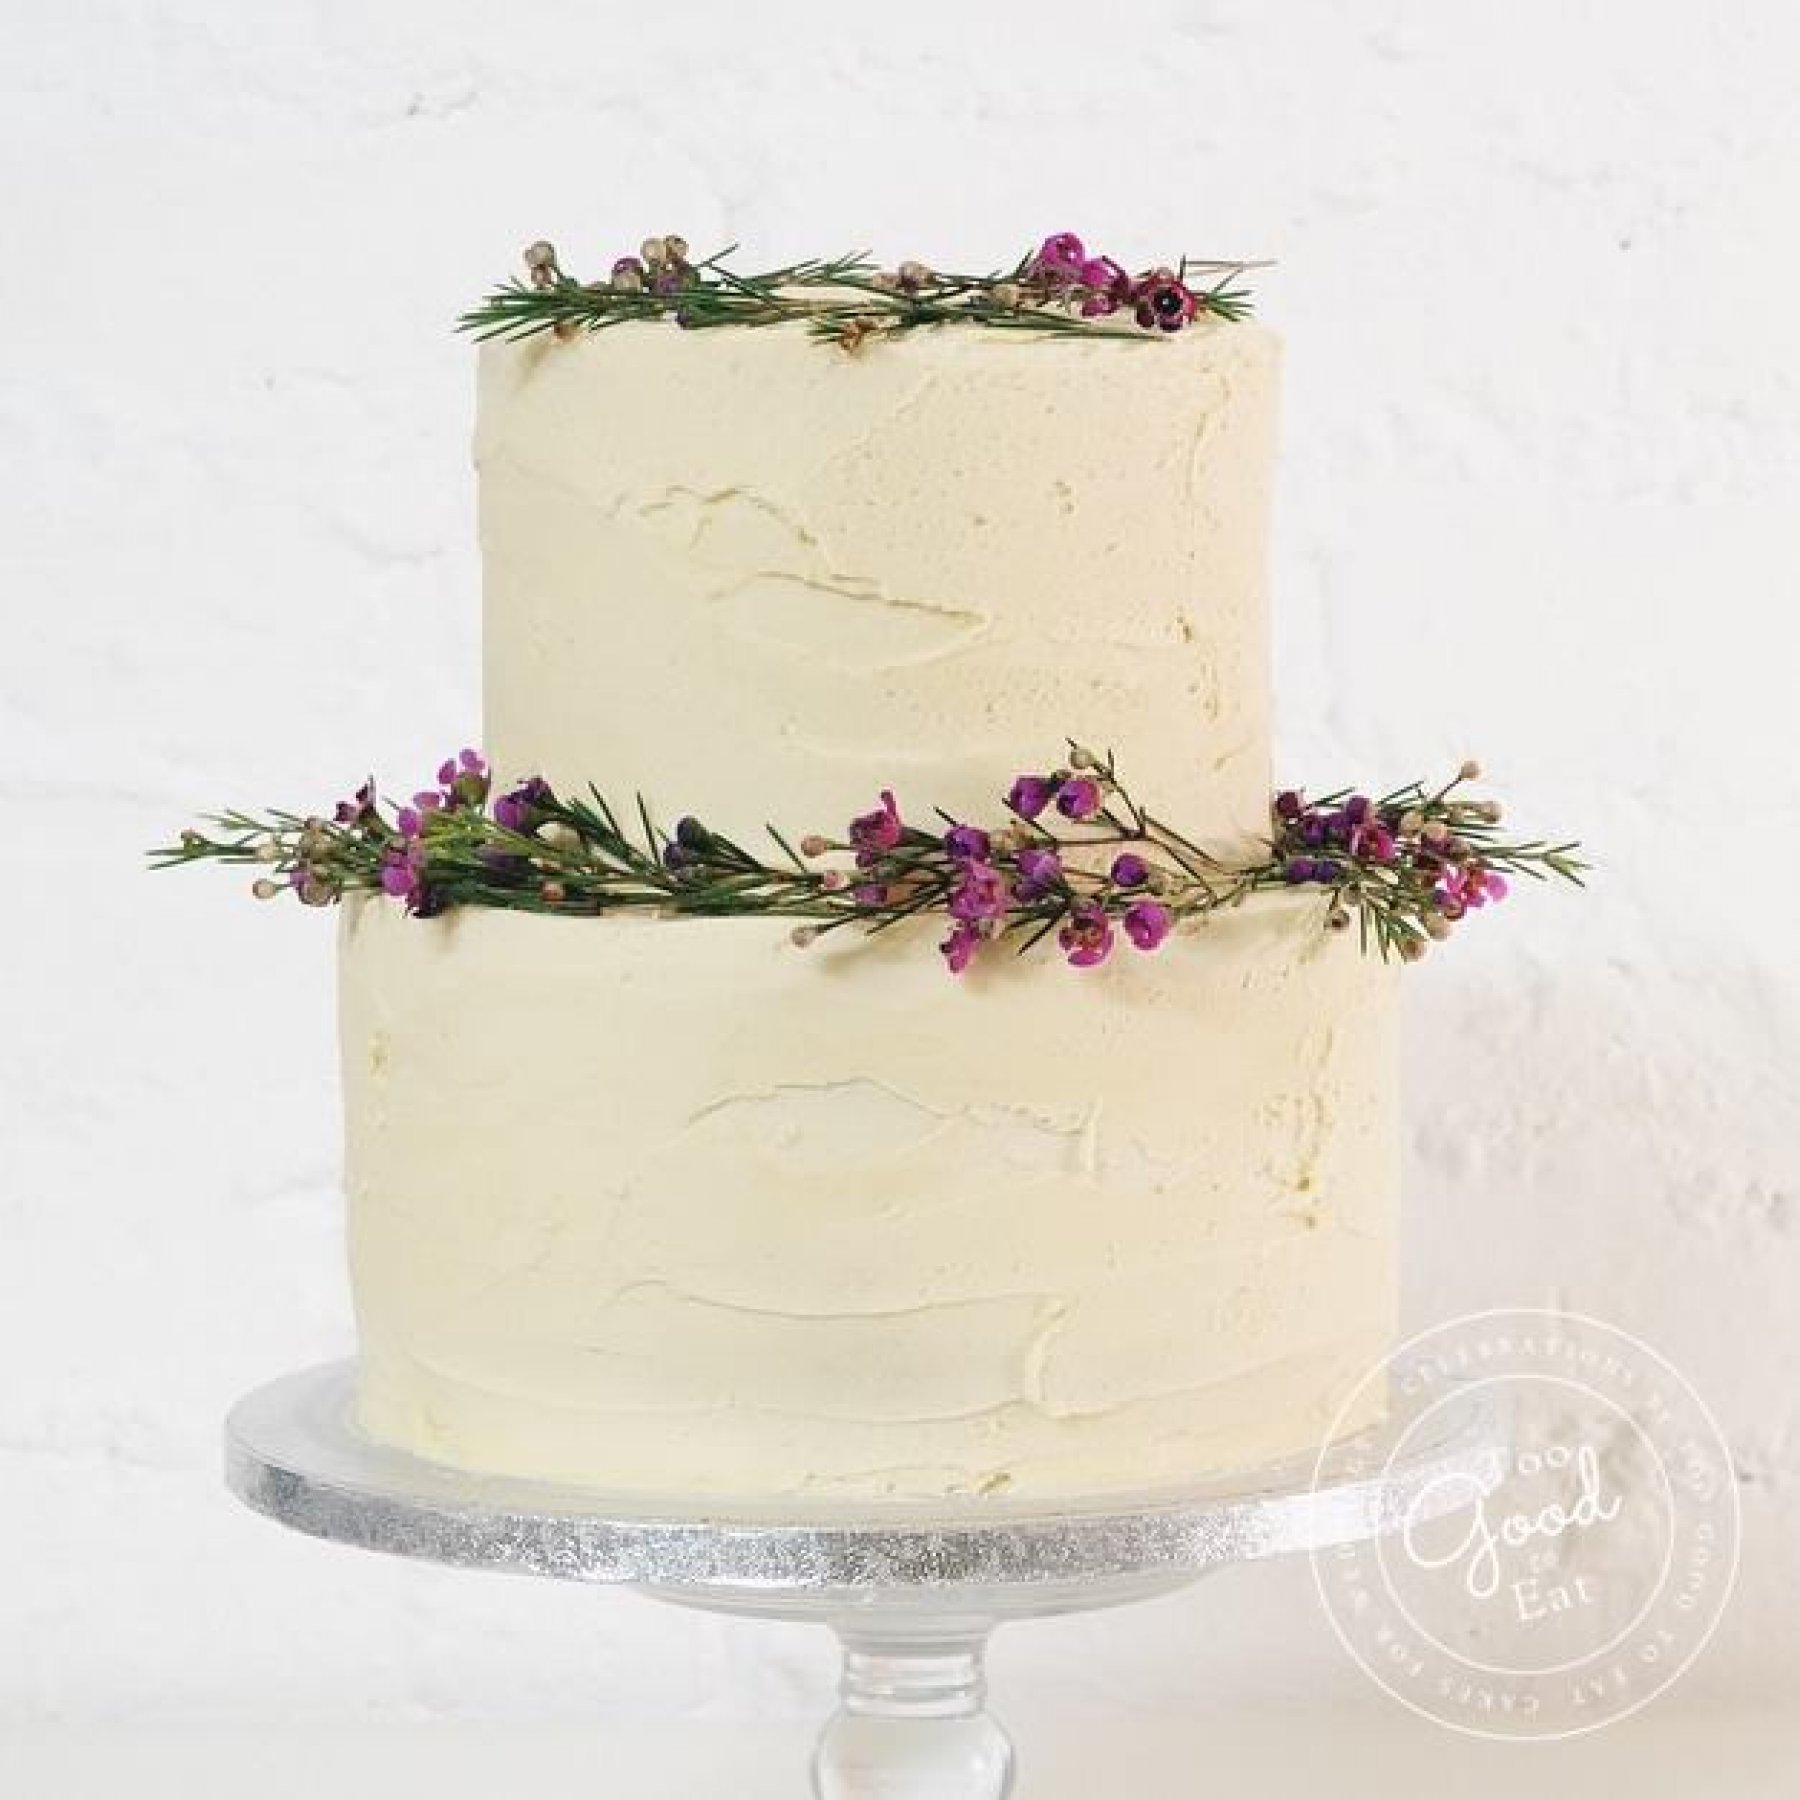 Why You Might Want to Reconsider a Naked Wedding Cake